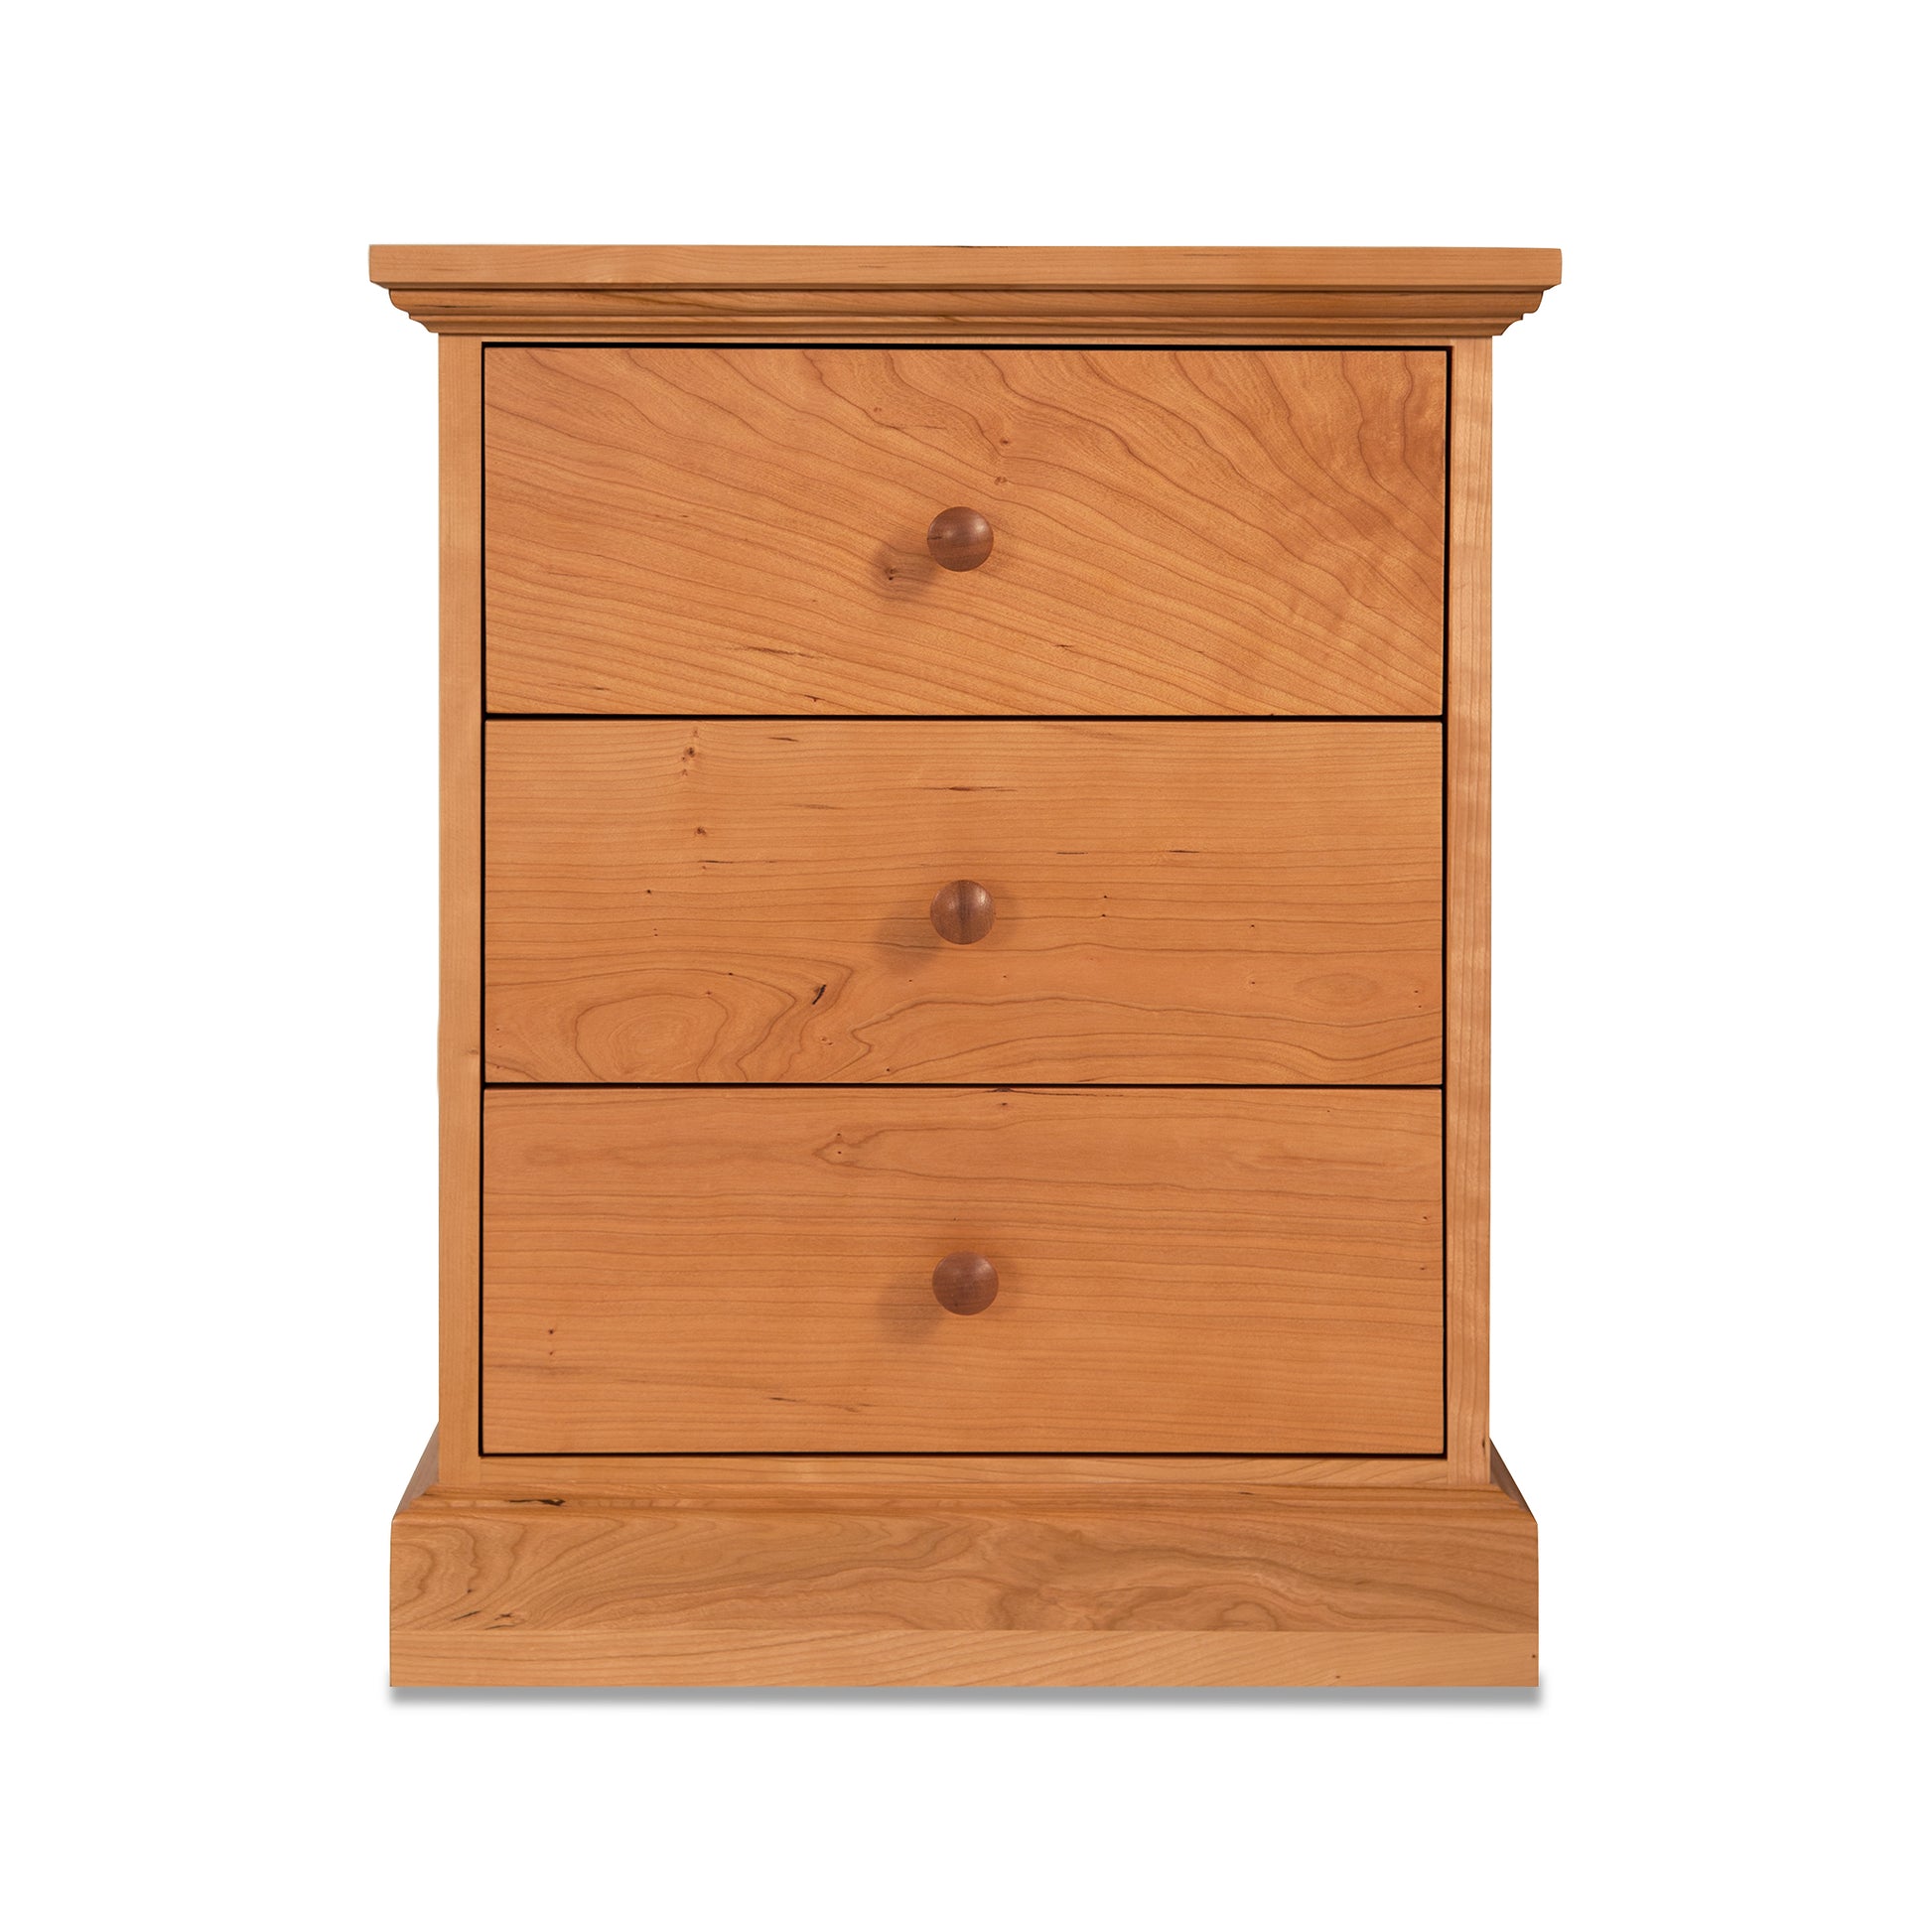 A New England Shaker 3-Drawer Nightstand by Lyndon Furniture with three drawers.